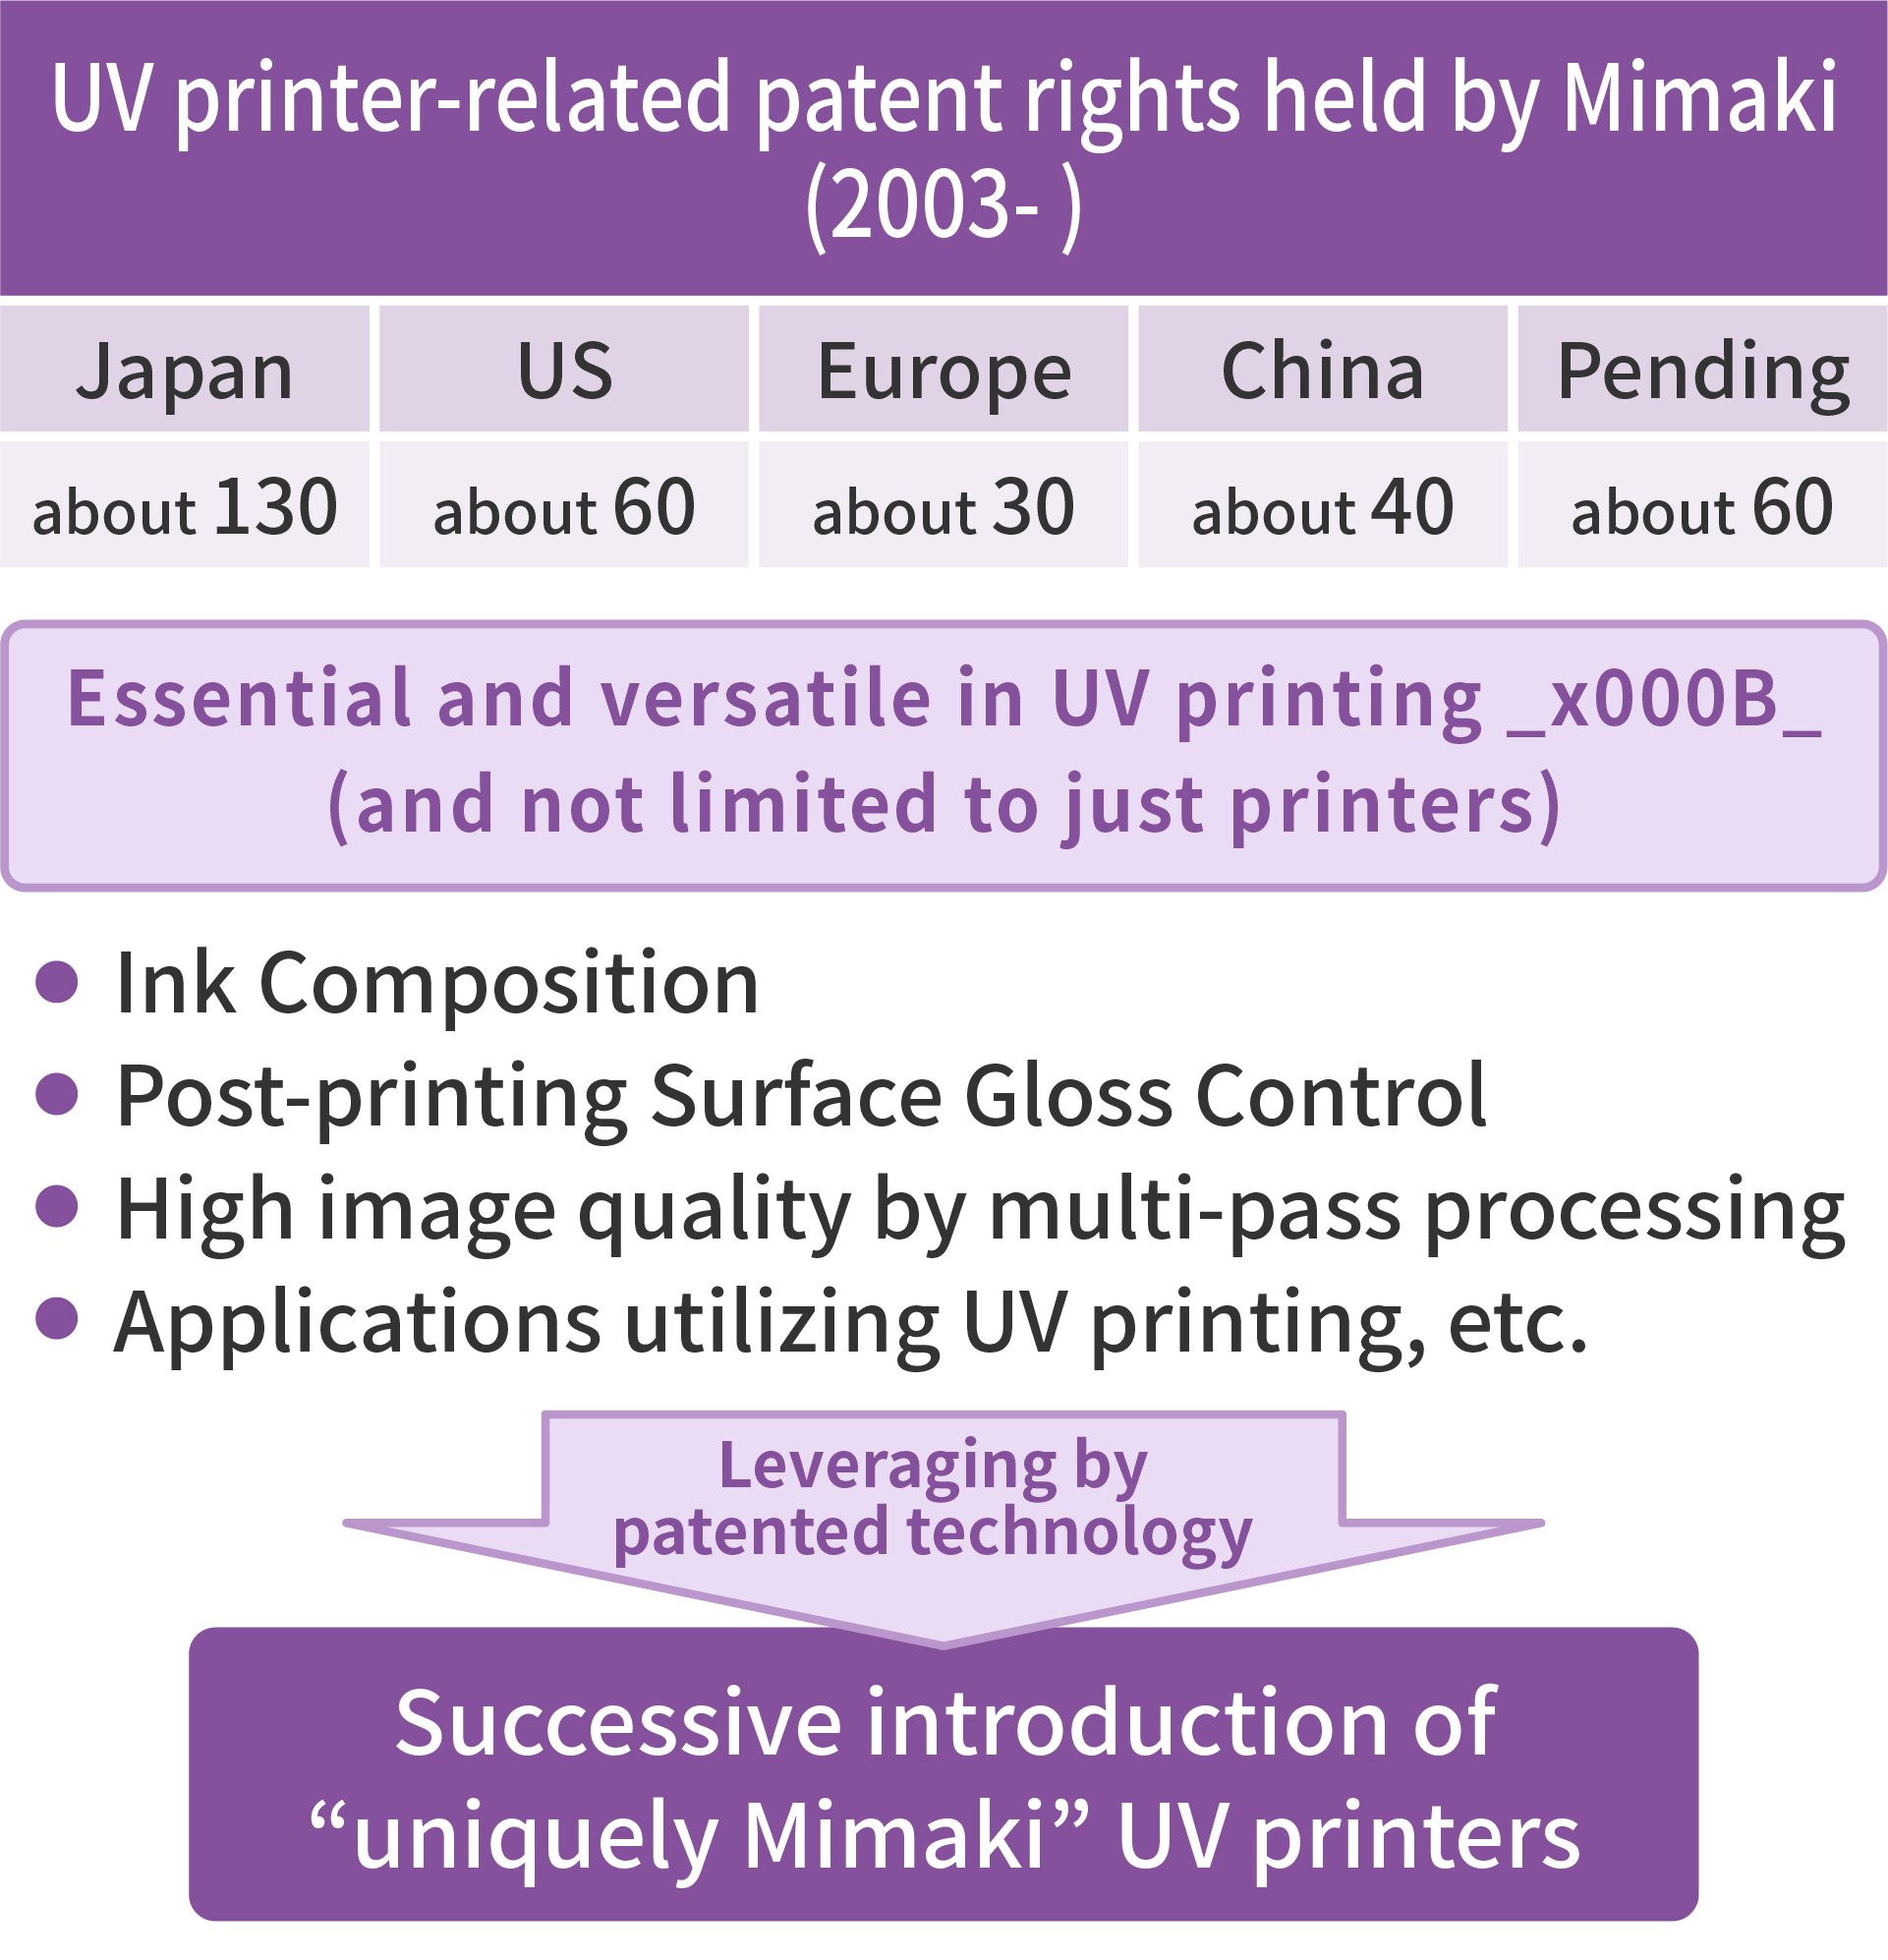 Strategic reinforcement of competitive advantages based on the strongest UV printer patenting technology within the industry